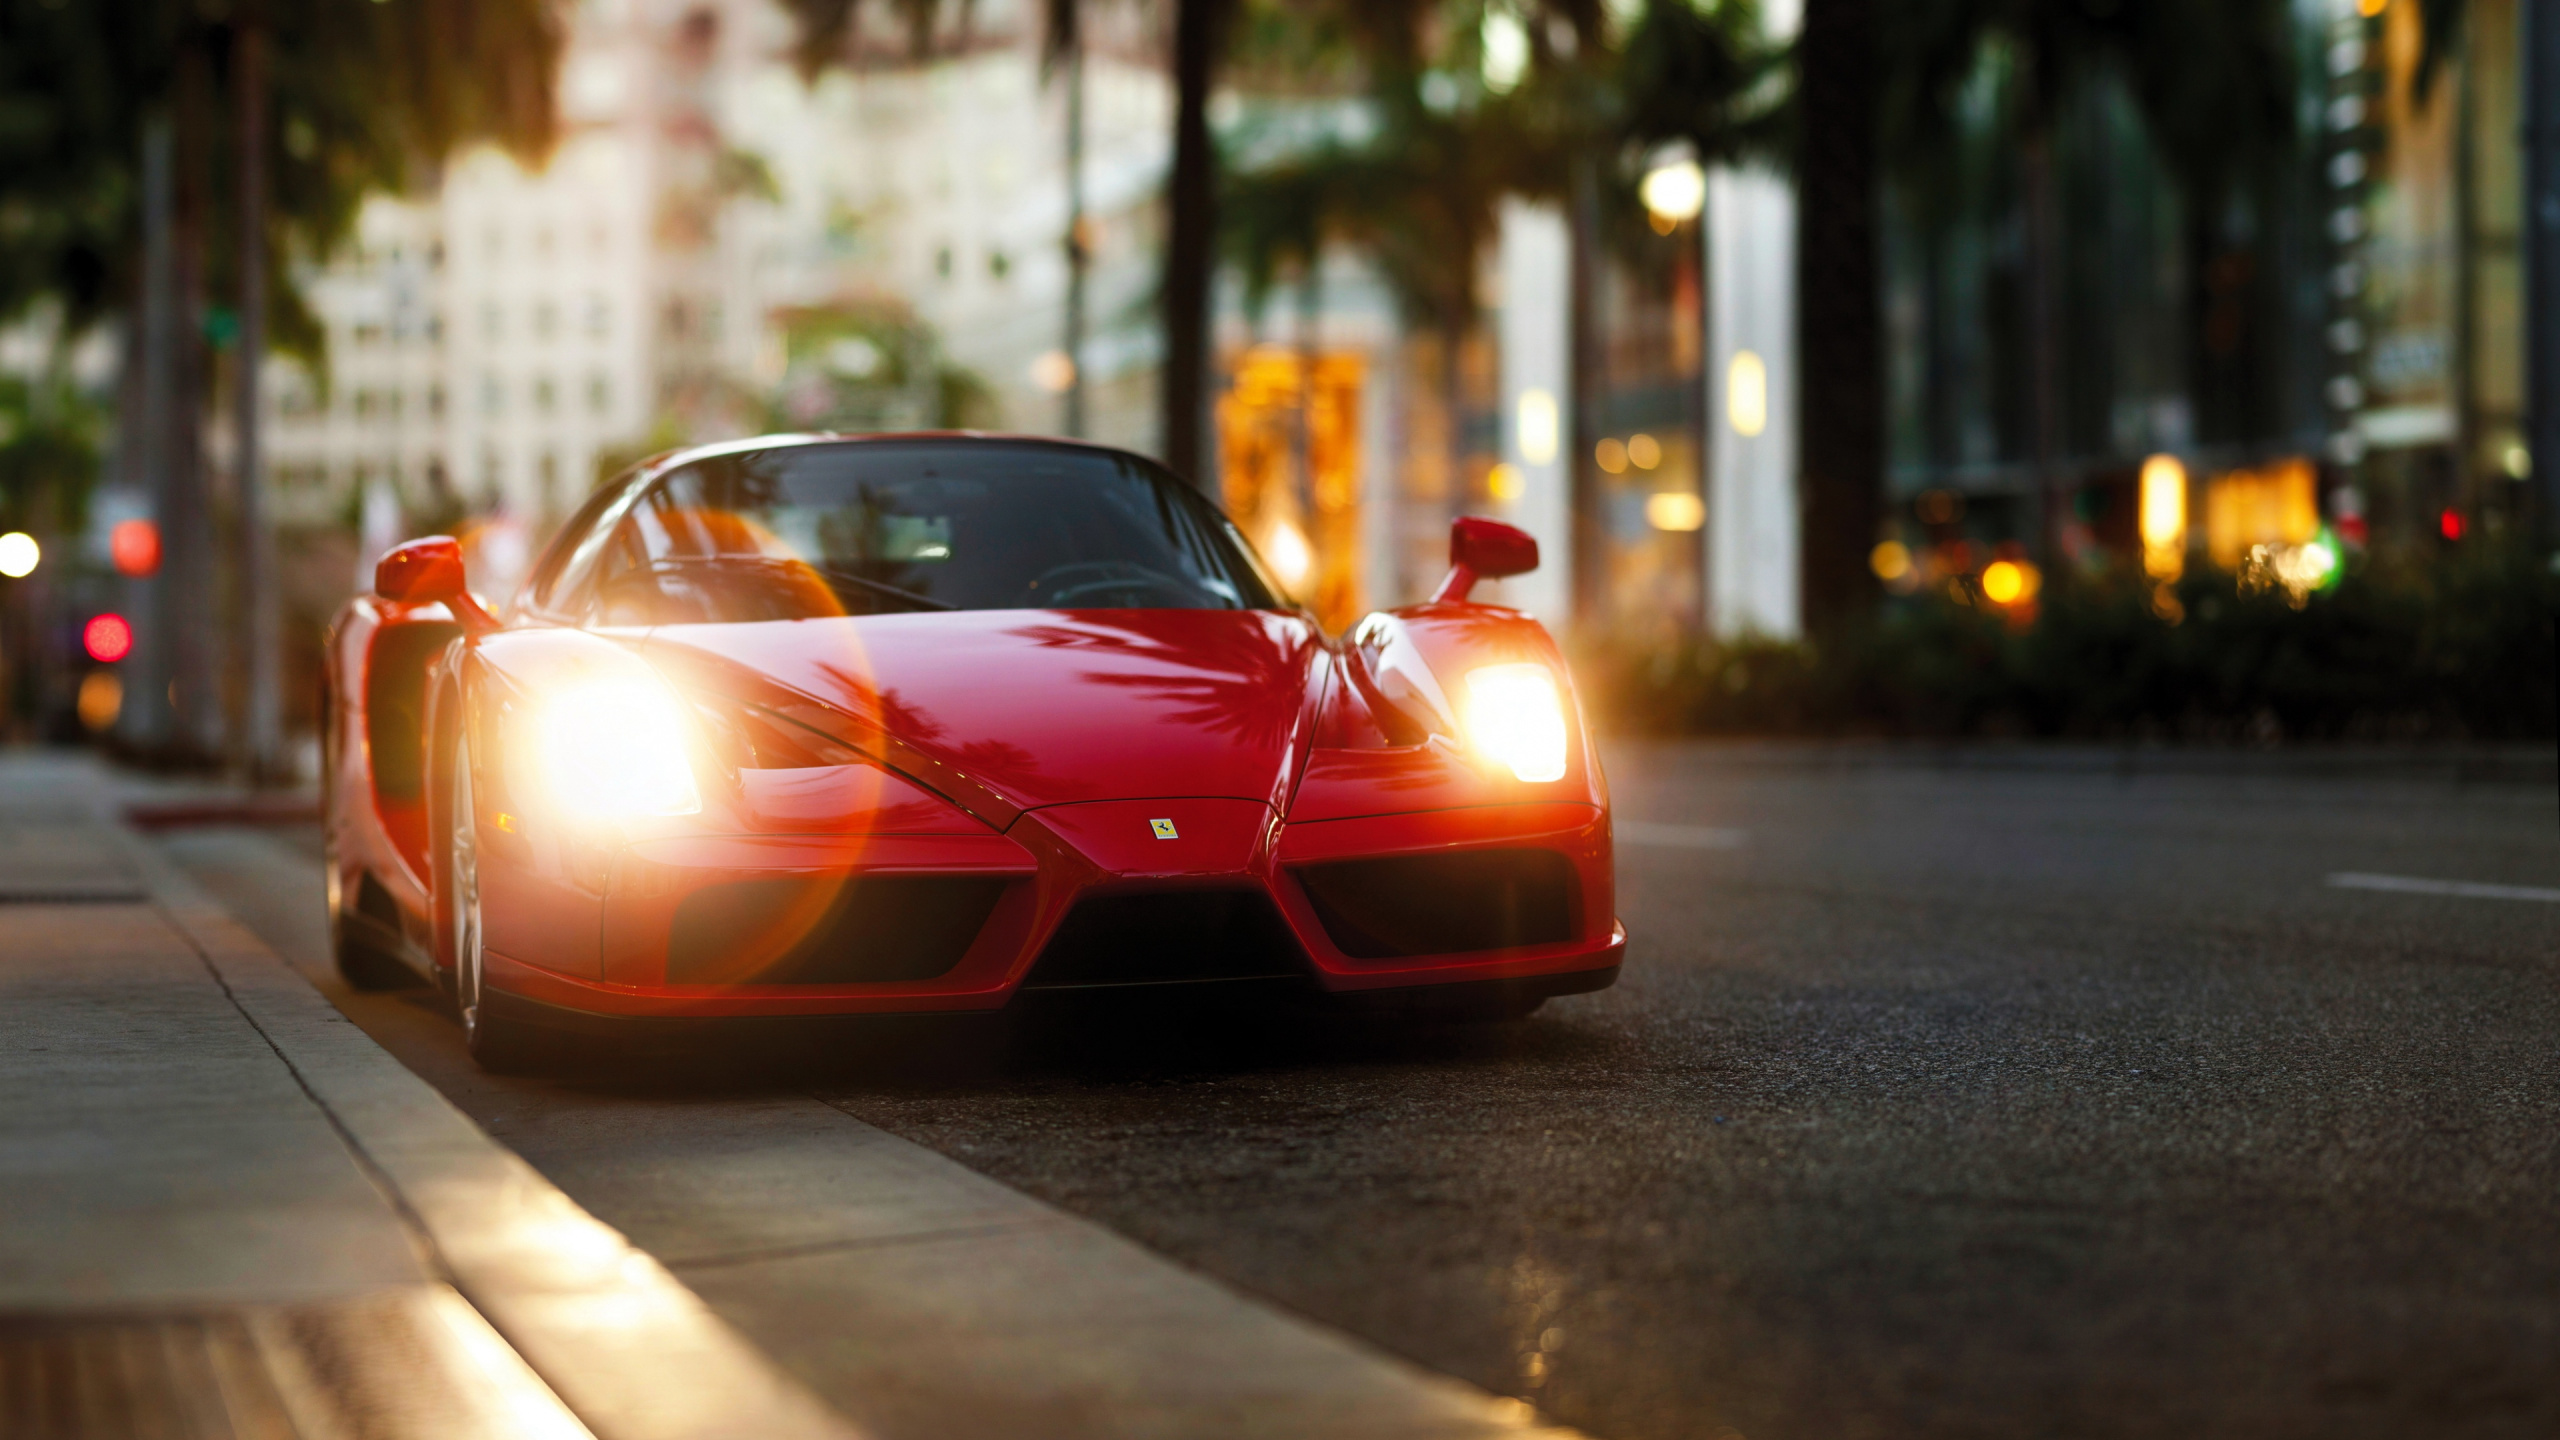 Red Ferrari Sports Car on Road During Daytime. Wallpaper in 2560x1440 Resolution